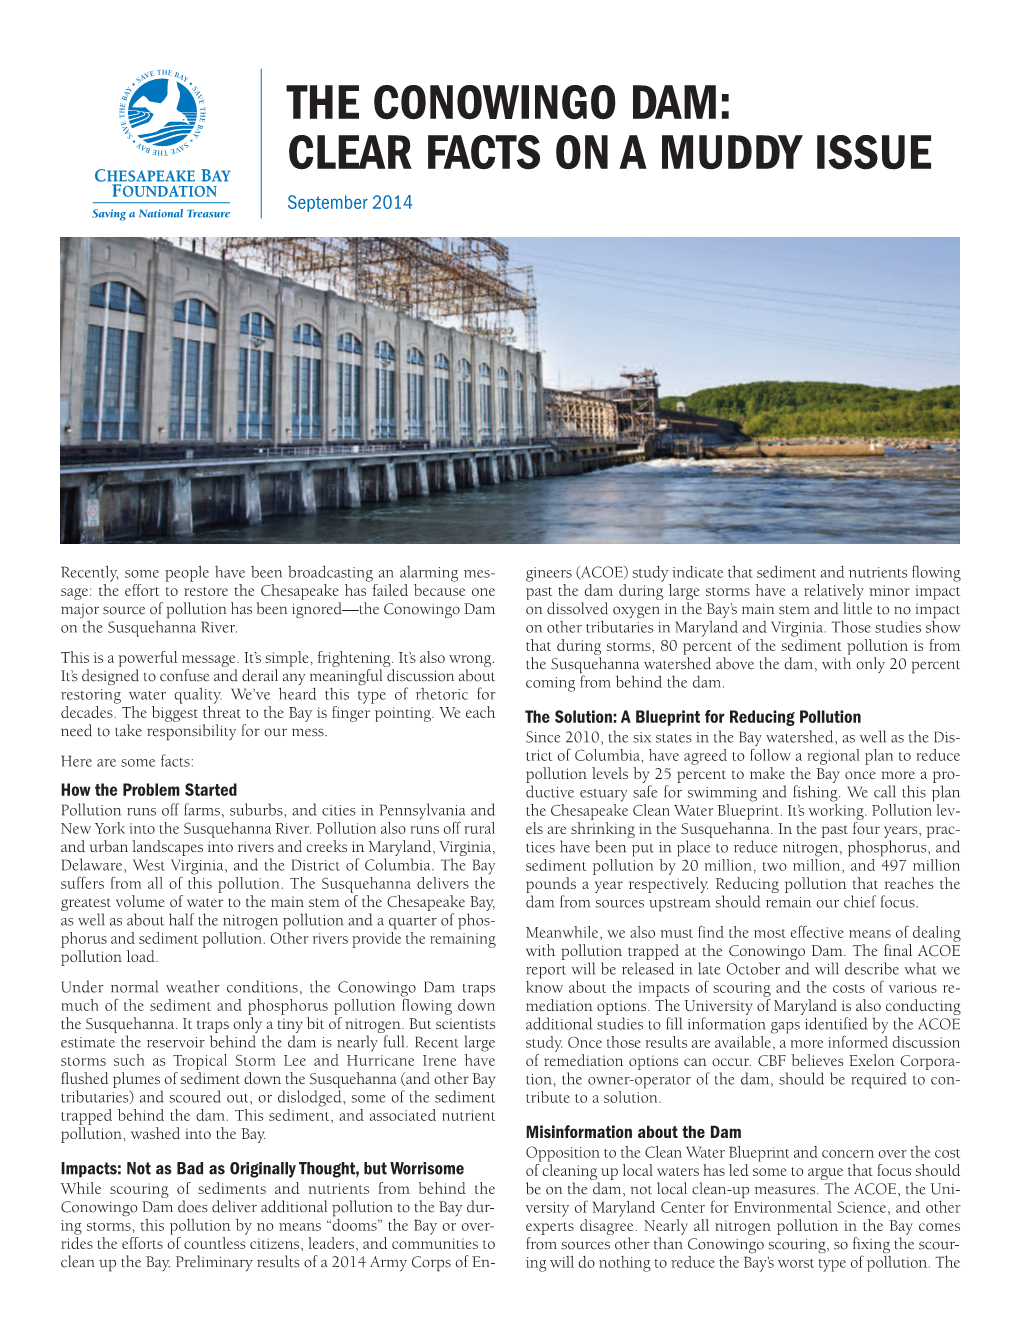 THE CONOWINGO DAM: CLEAR FACTS on a MUDDY ISSUE September 2014